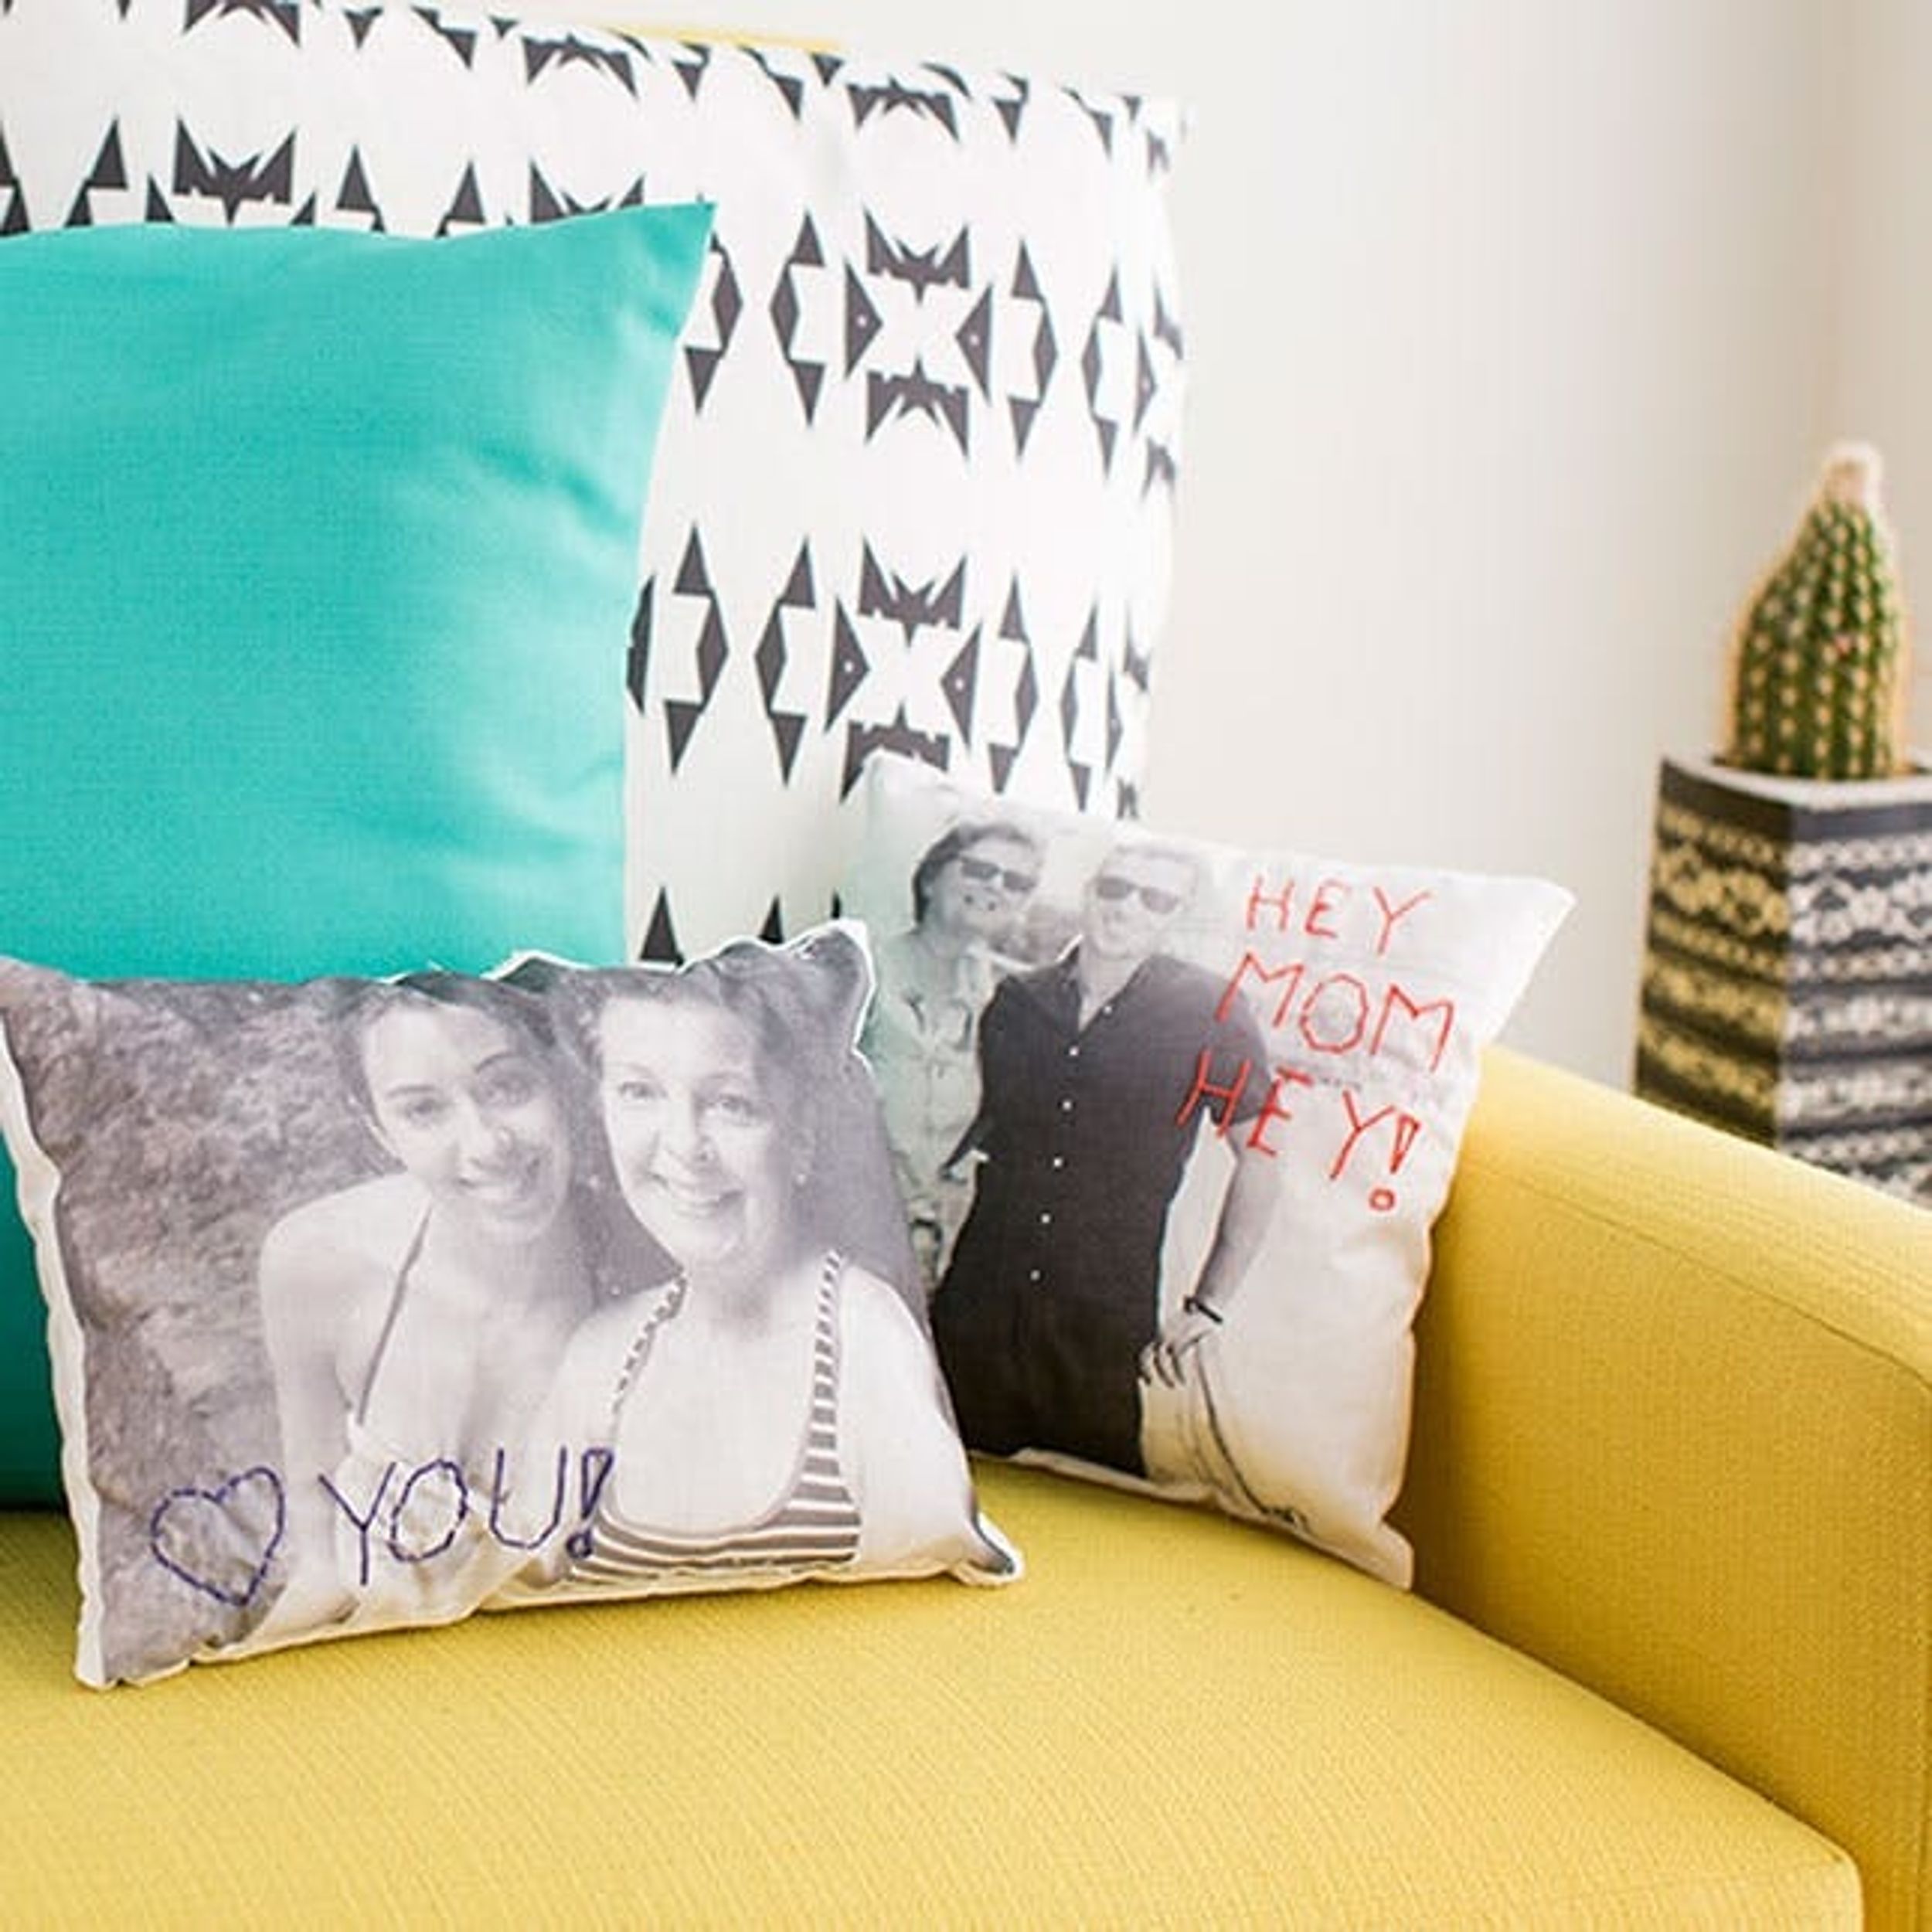 Mother’s Day Win: Make Custom Photo Pillows of You and Your Mama